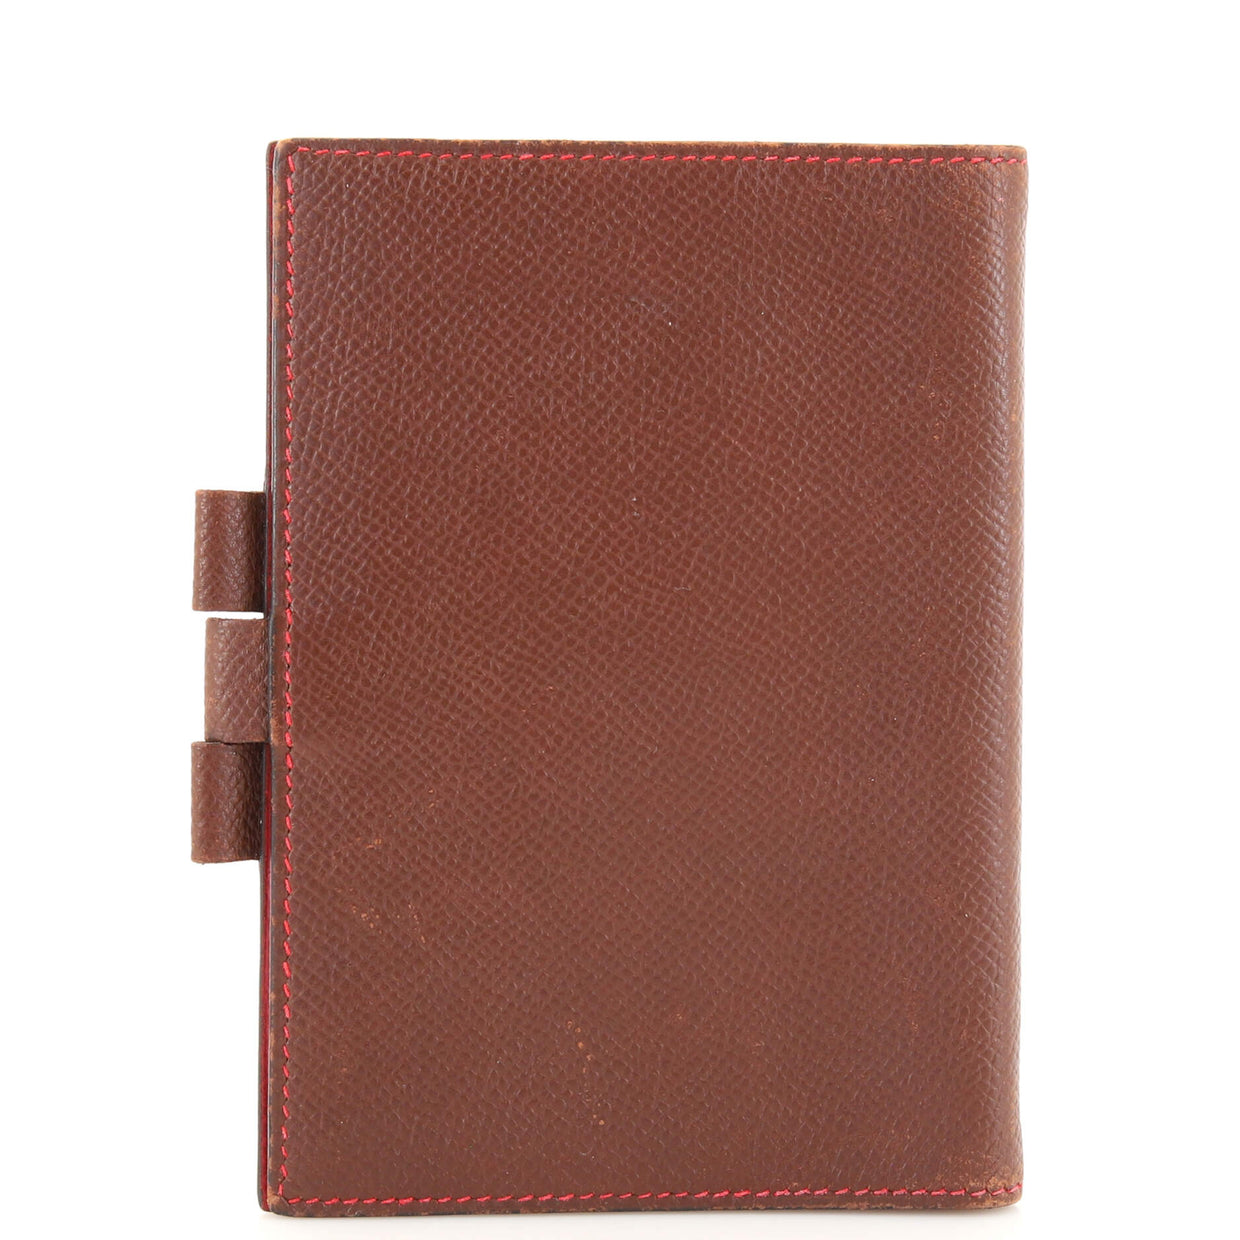 Hermes Globe Trotter Agenda Cover Leather PM Brown 1656493